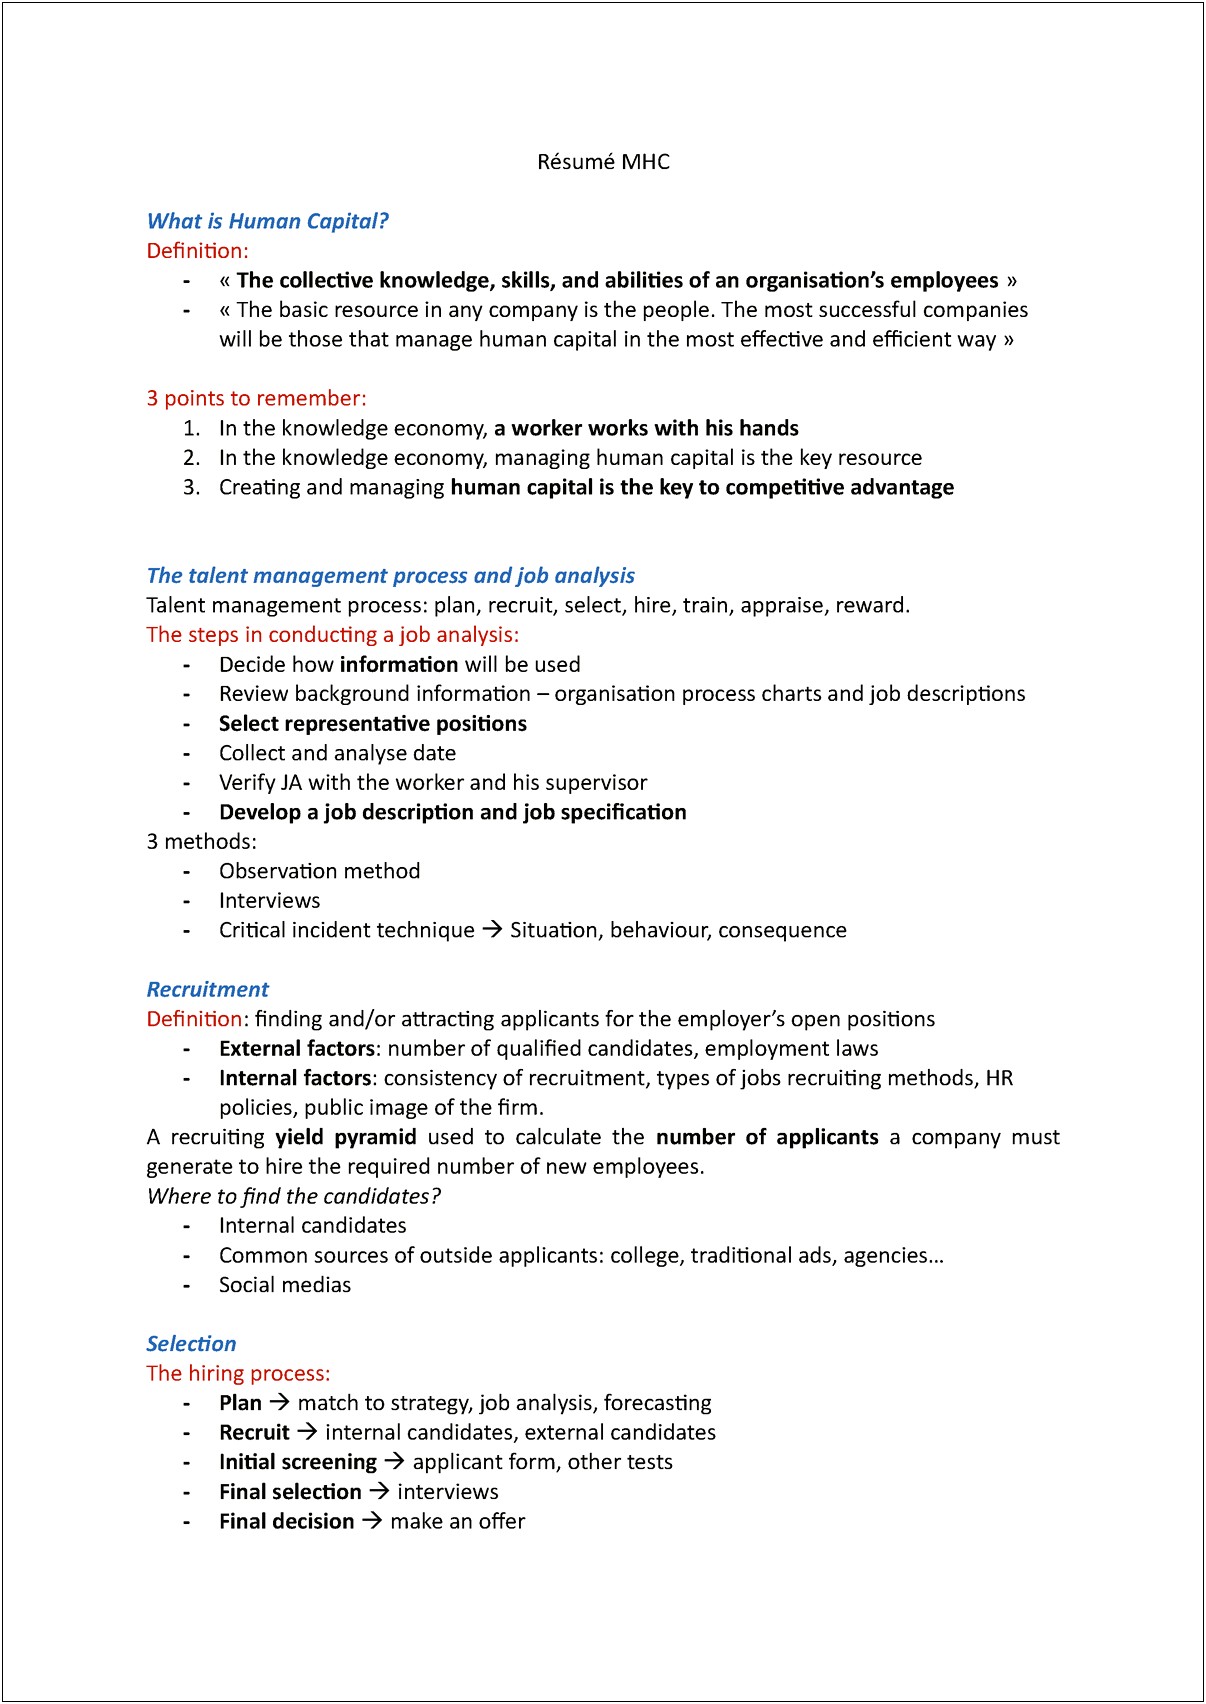 Human Capital Management In Resume